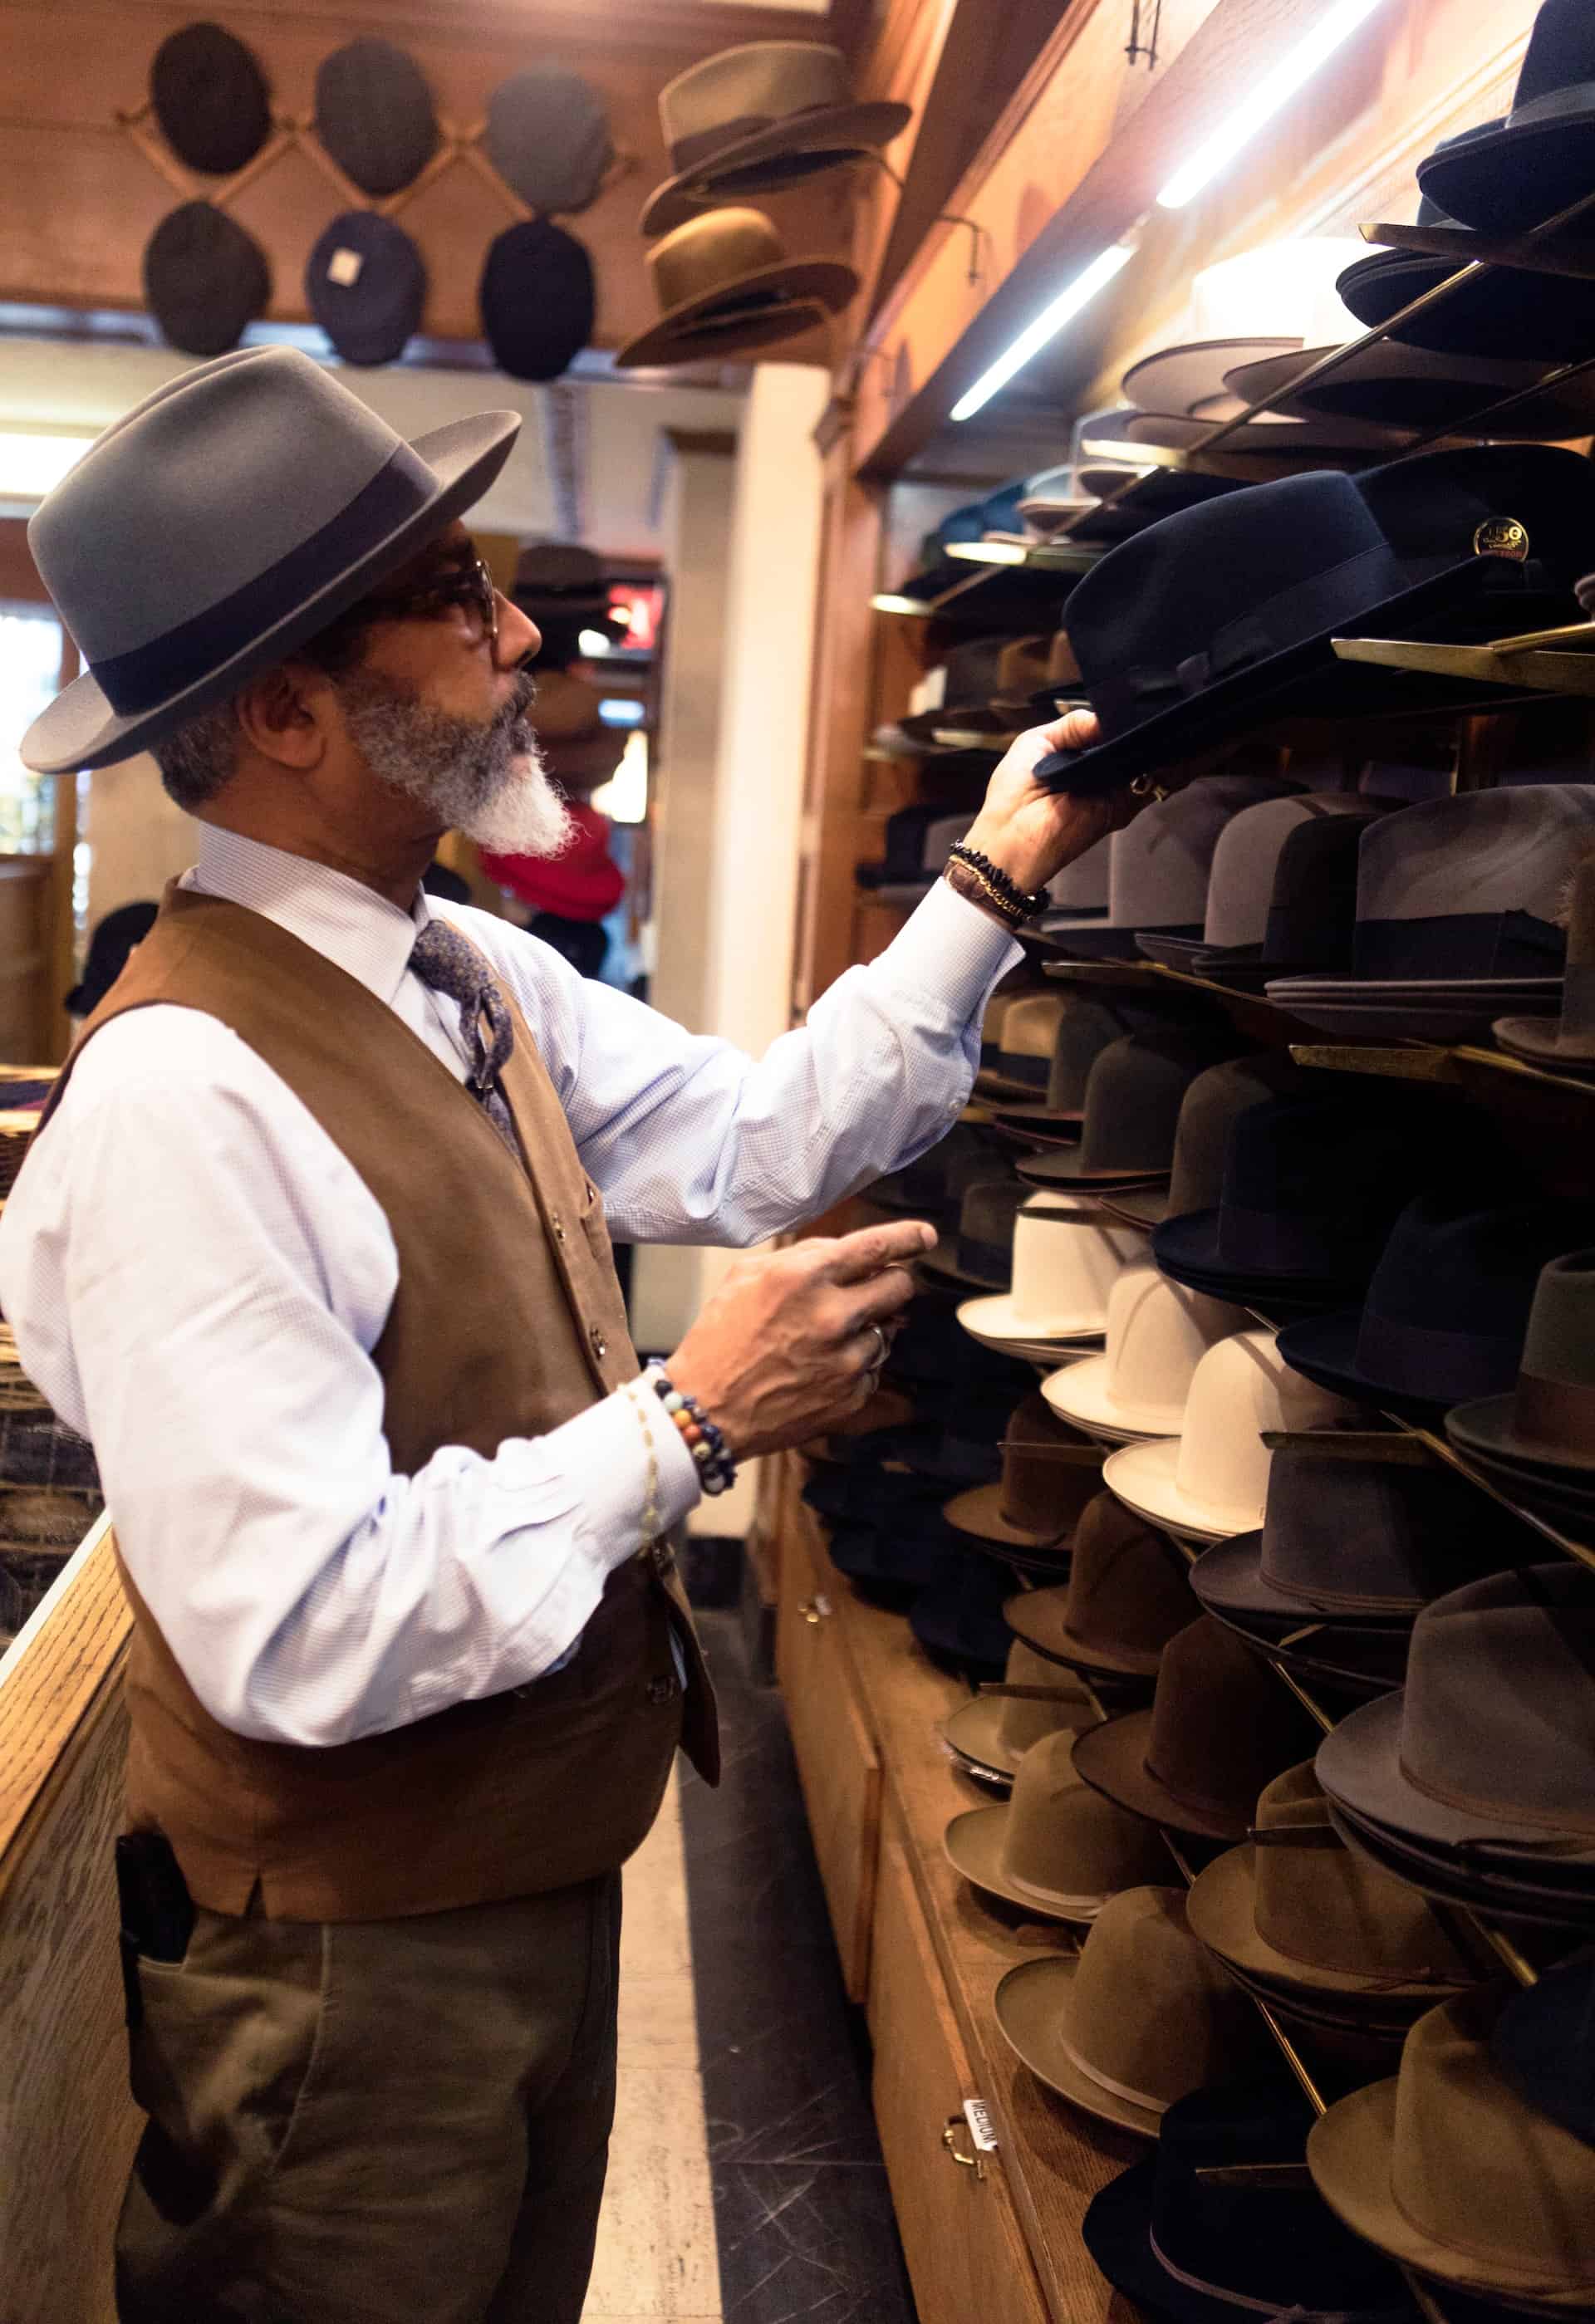 10 Best Hats for Big Heads: Straw, Cowboy, and More – American Hat Makers